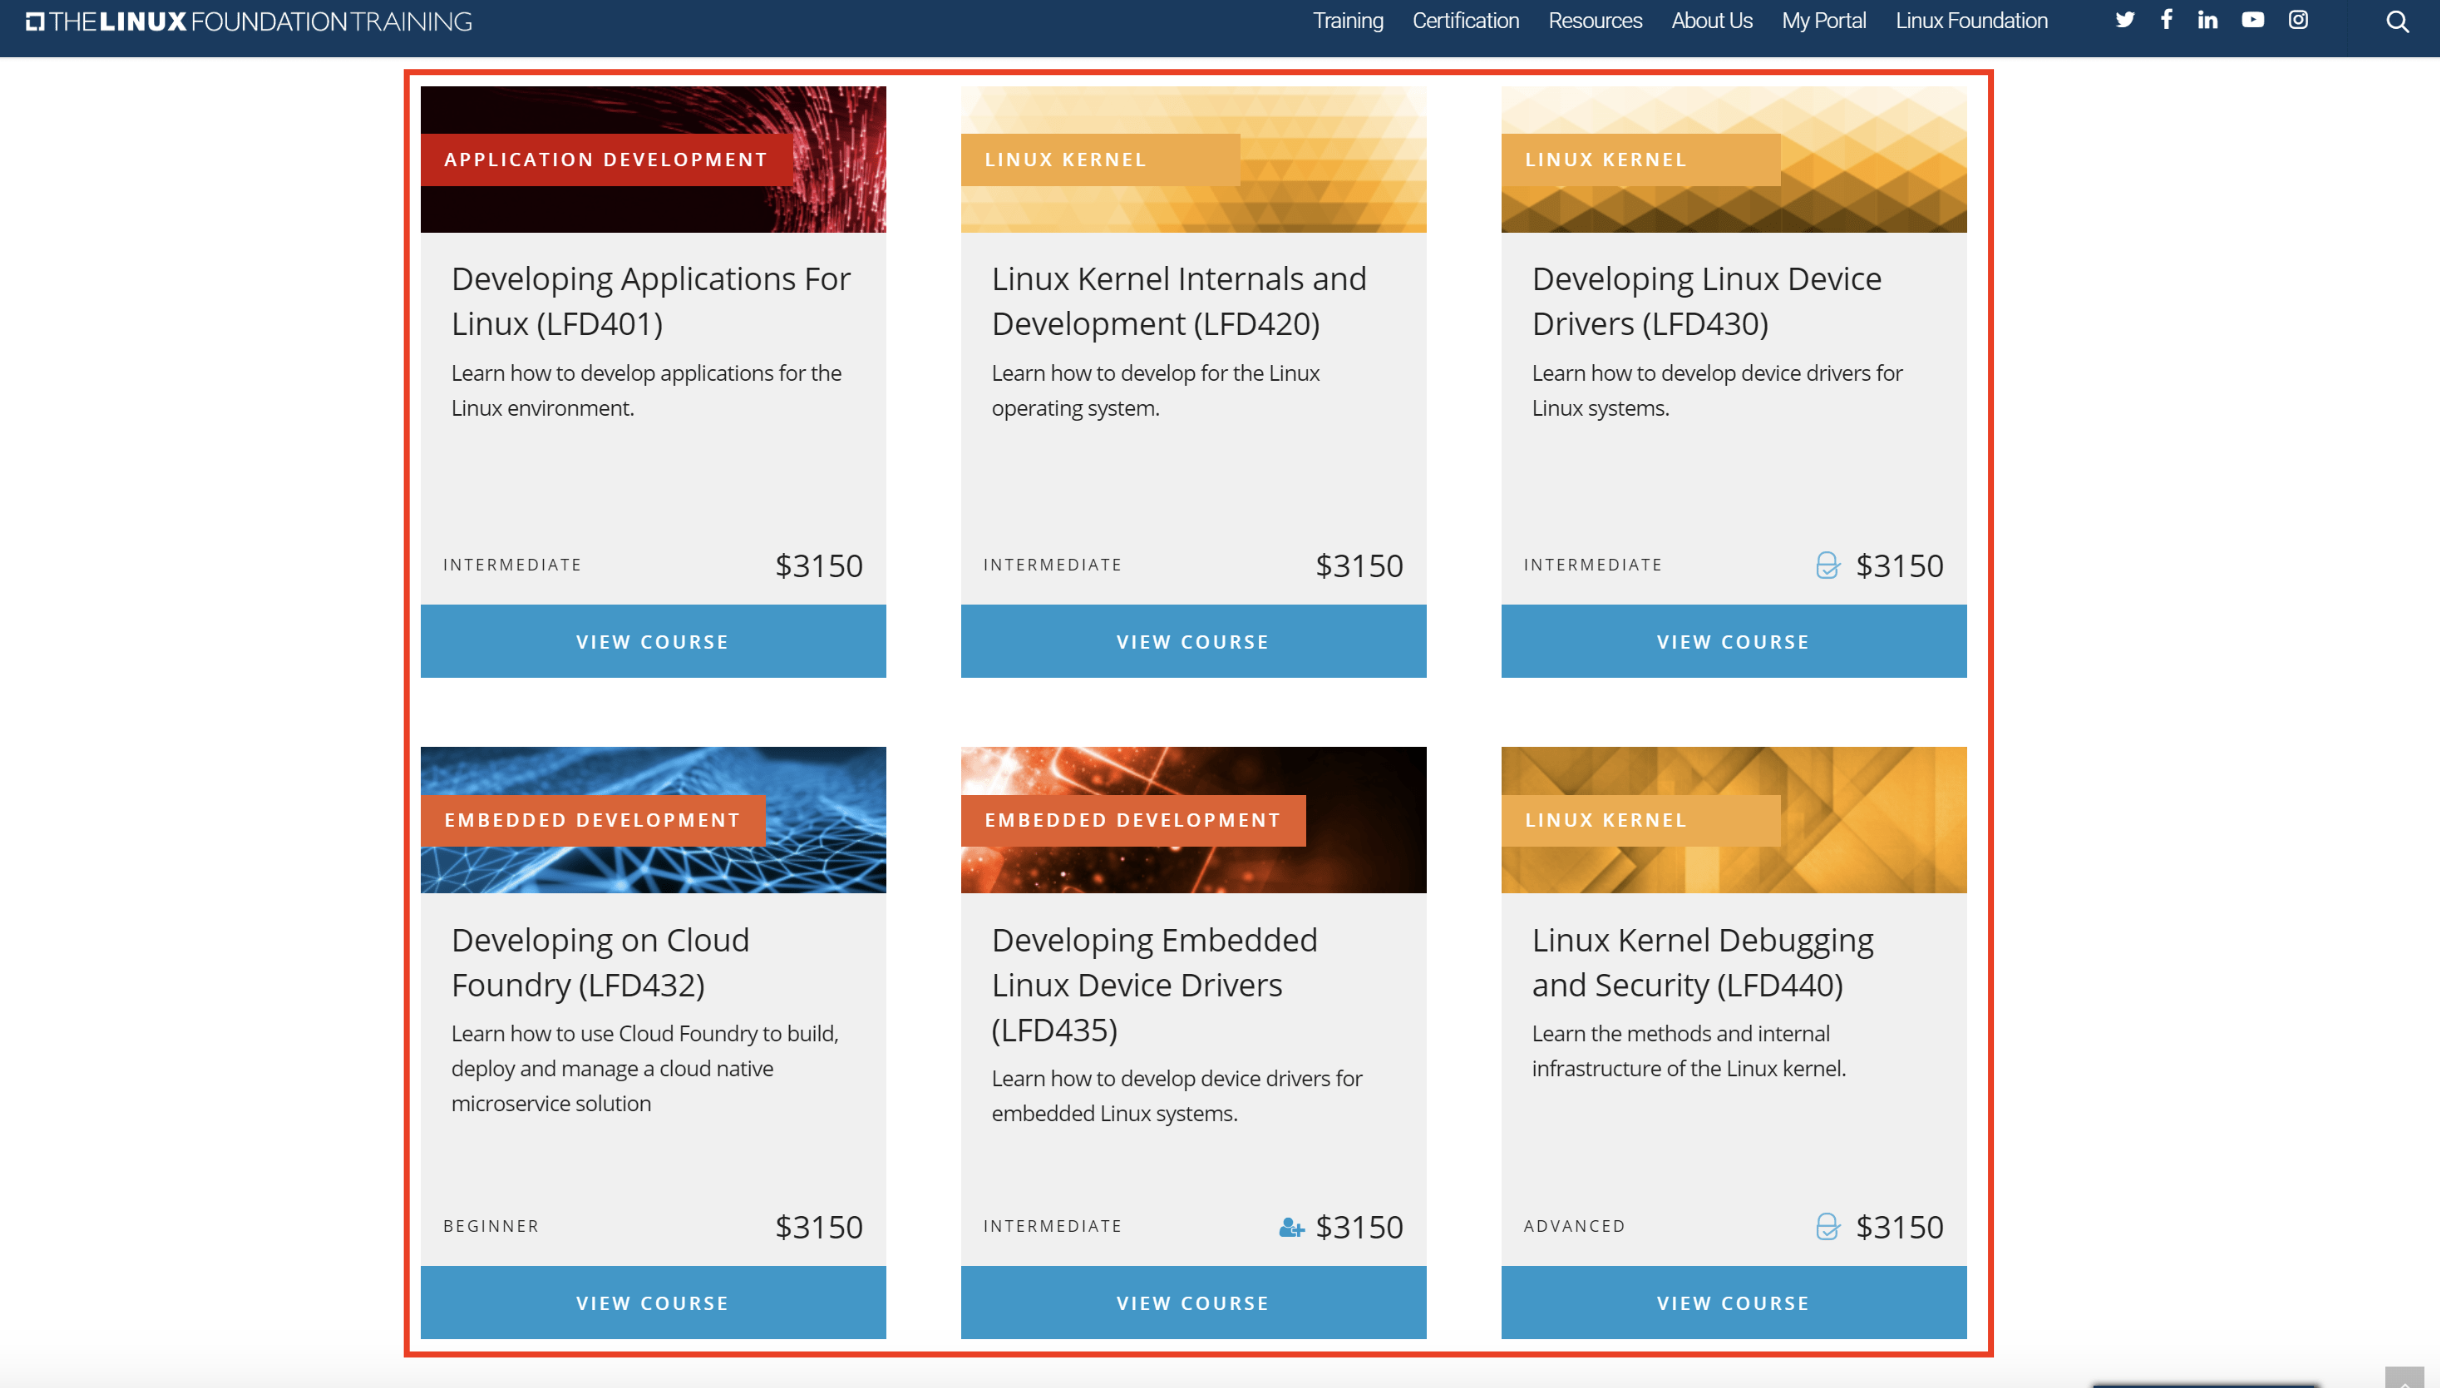 Linux Foundation Training Pricing